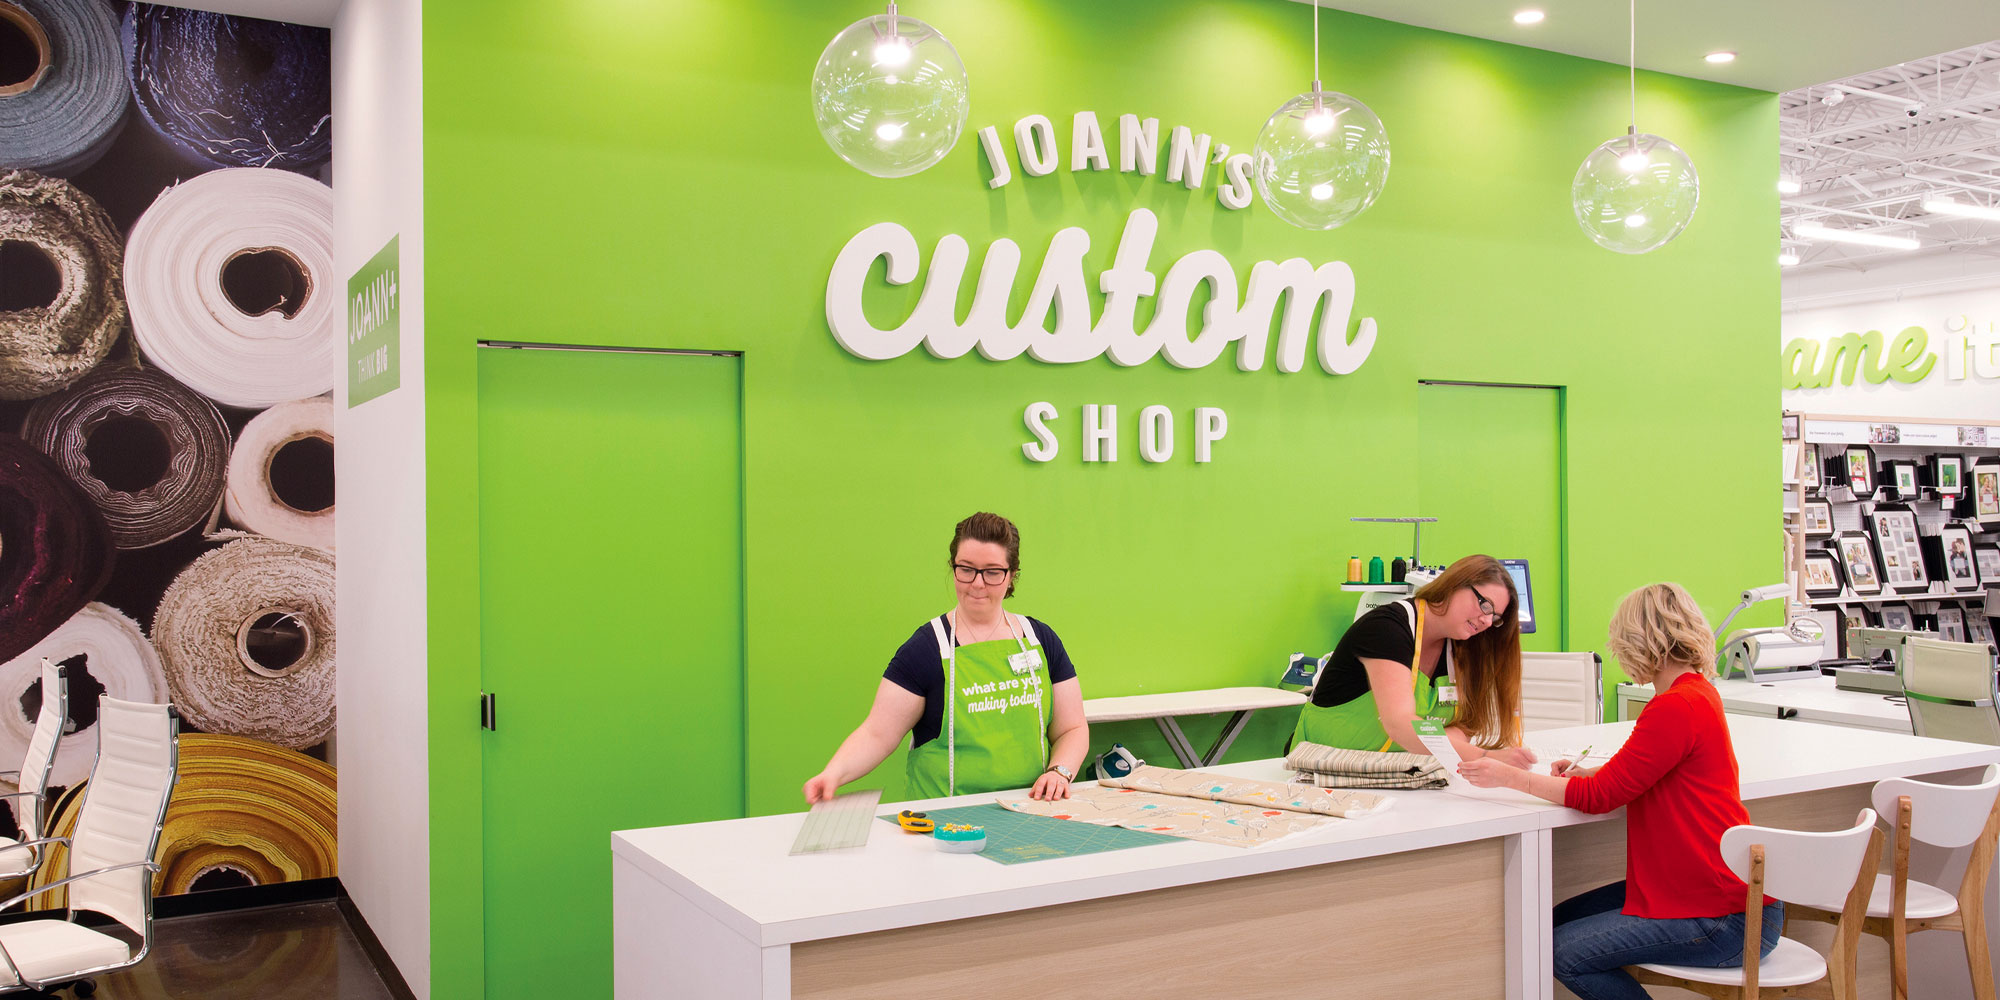 JOANN Fabrics is offering FREE classes + supplies to make your own